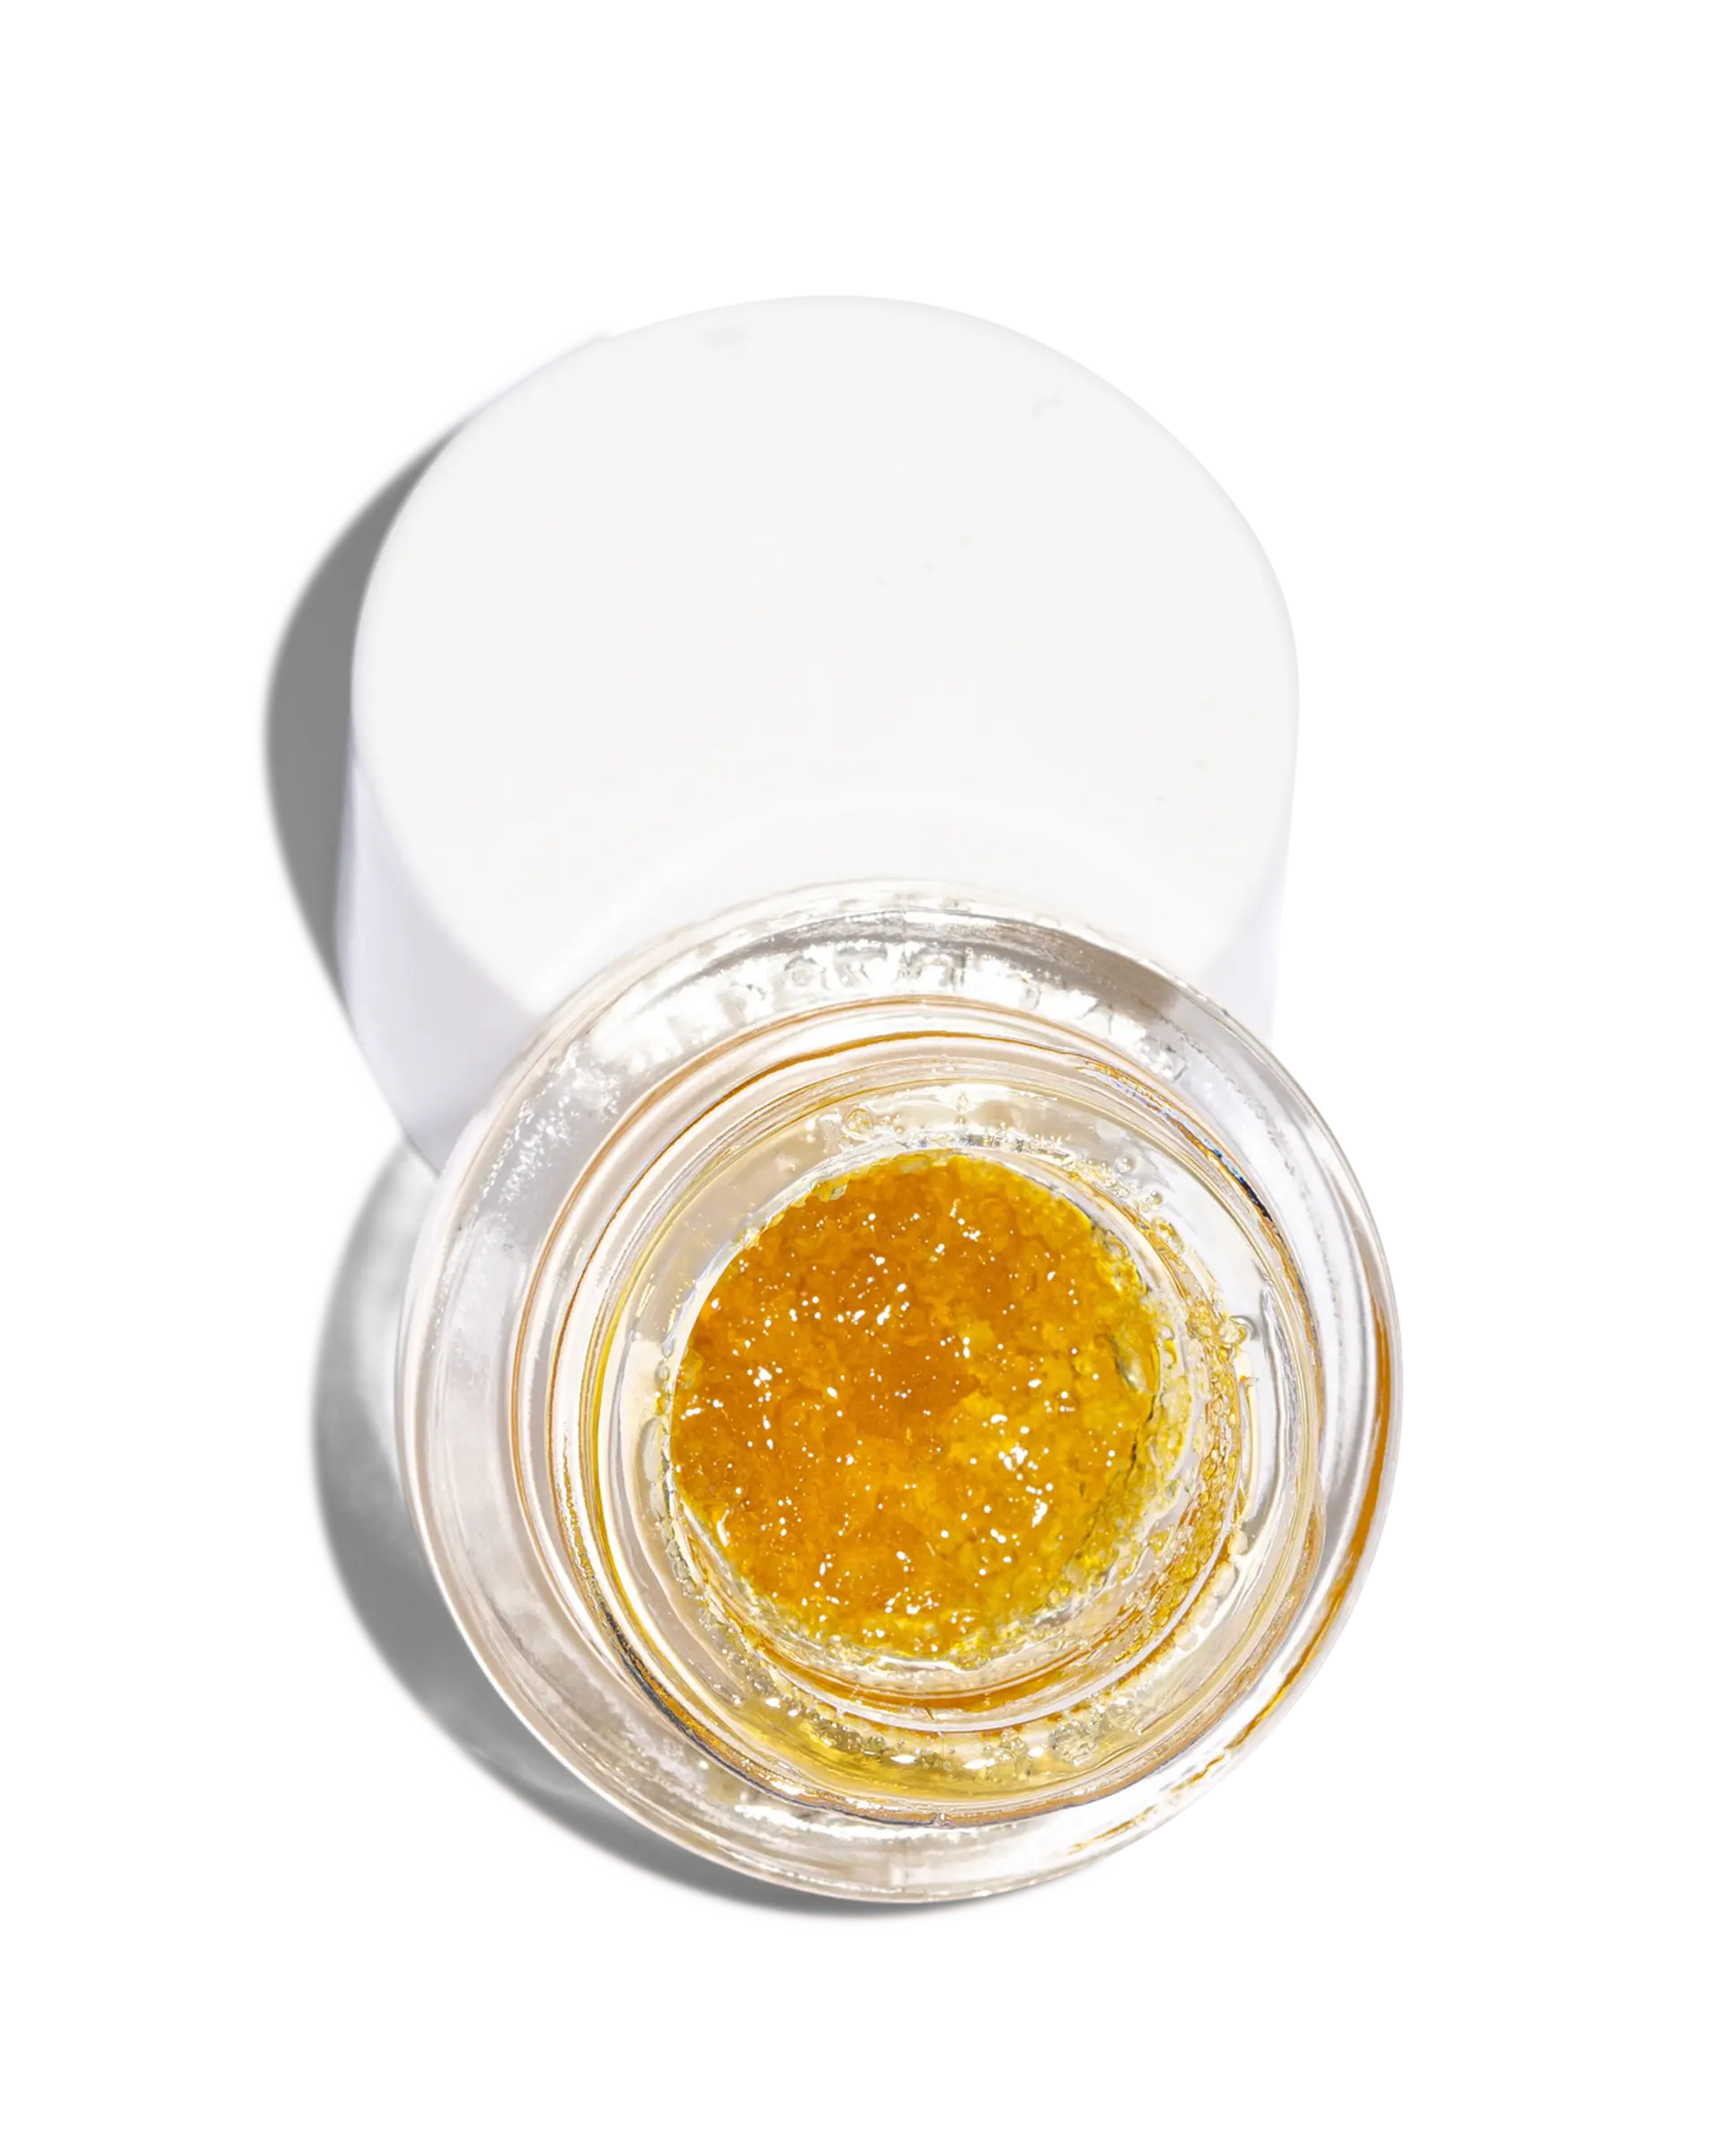 Anyweather Live Resin 1g, 1 of 2